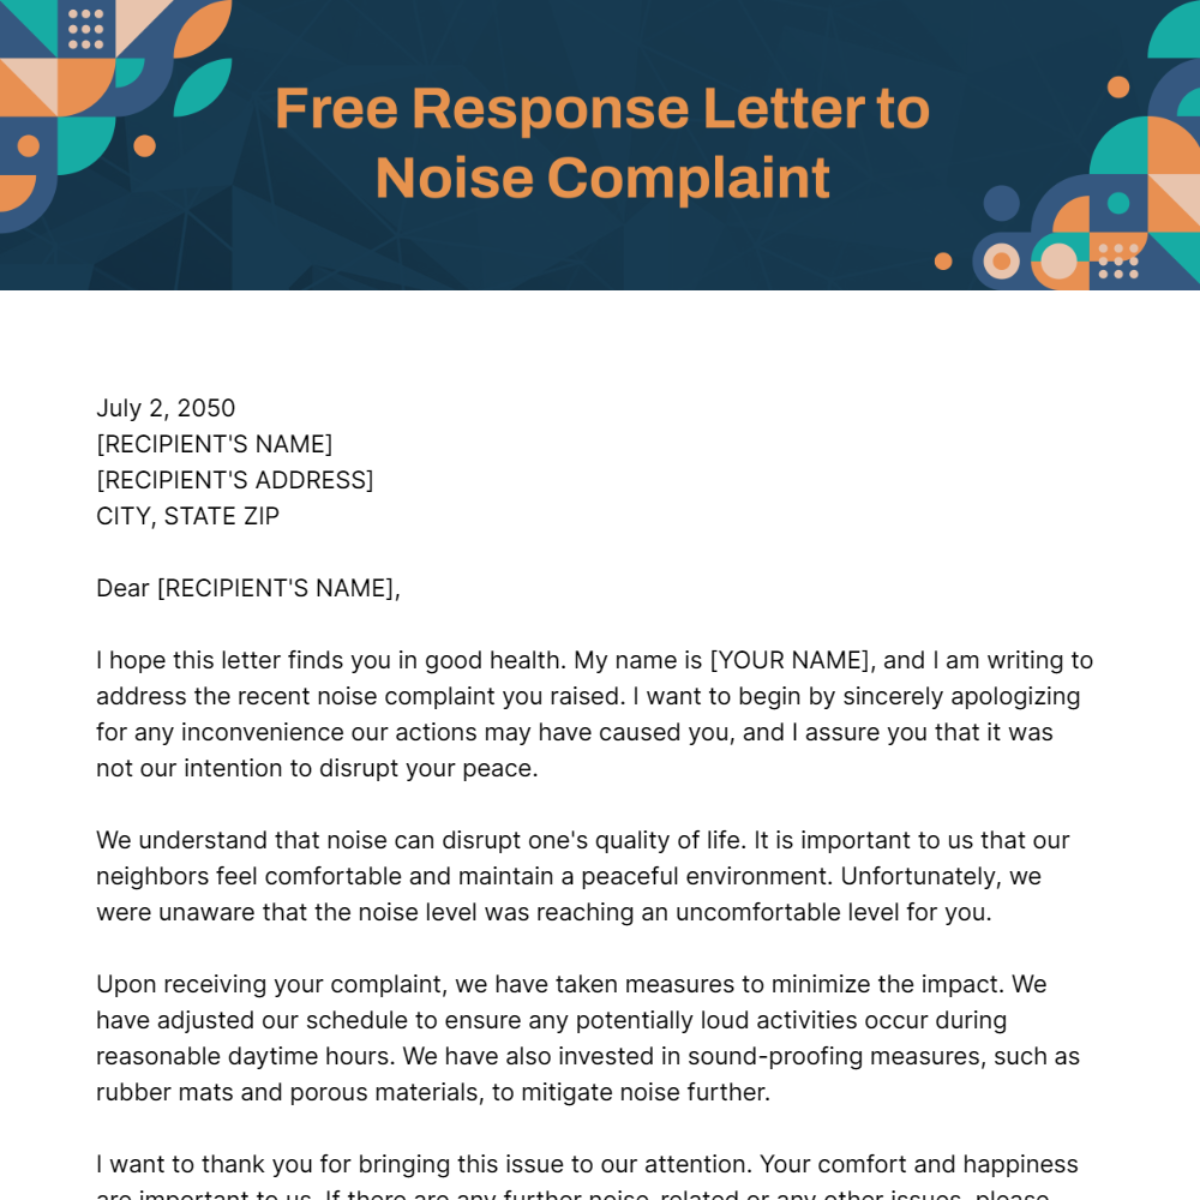 Free Response Letter to Noise Complaint